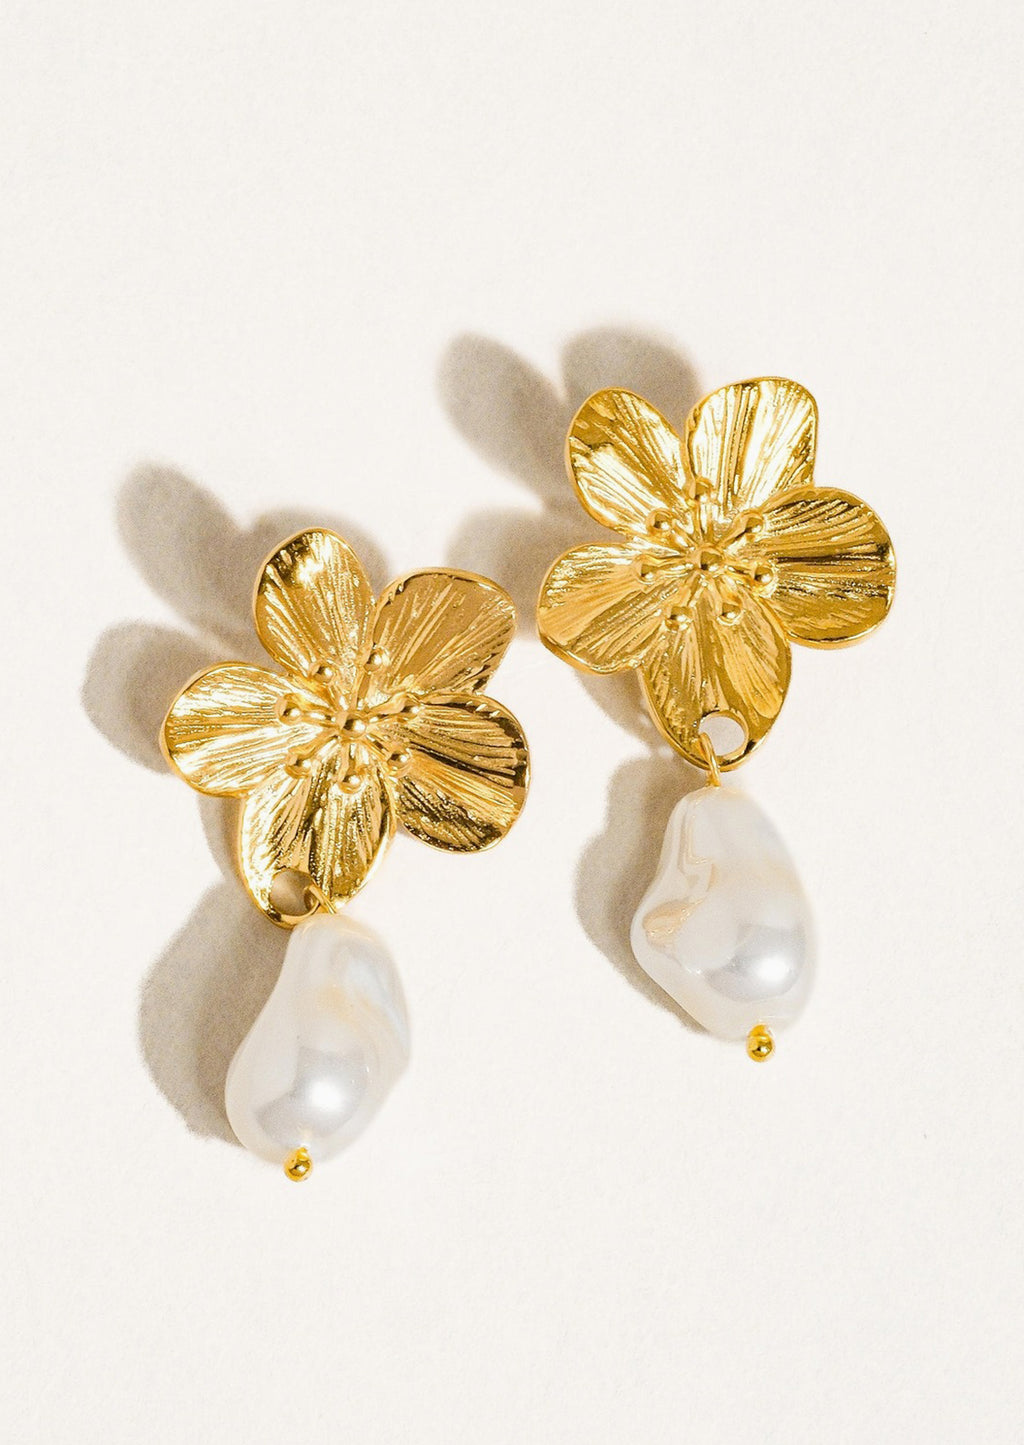 1: A pair of earrings with flower shaped post and dangling pearl bead.